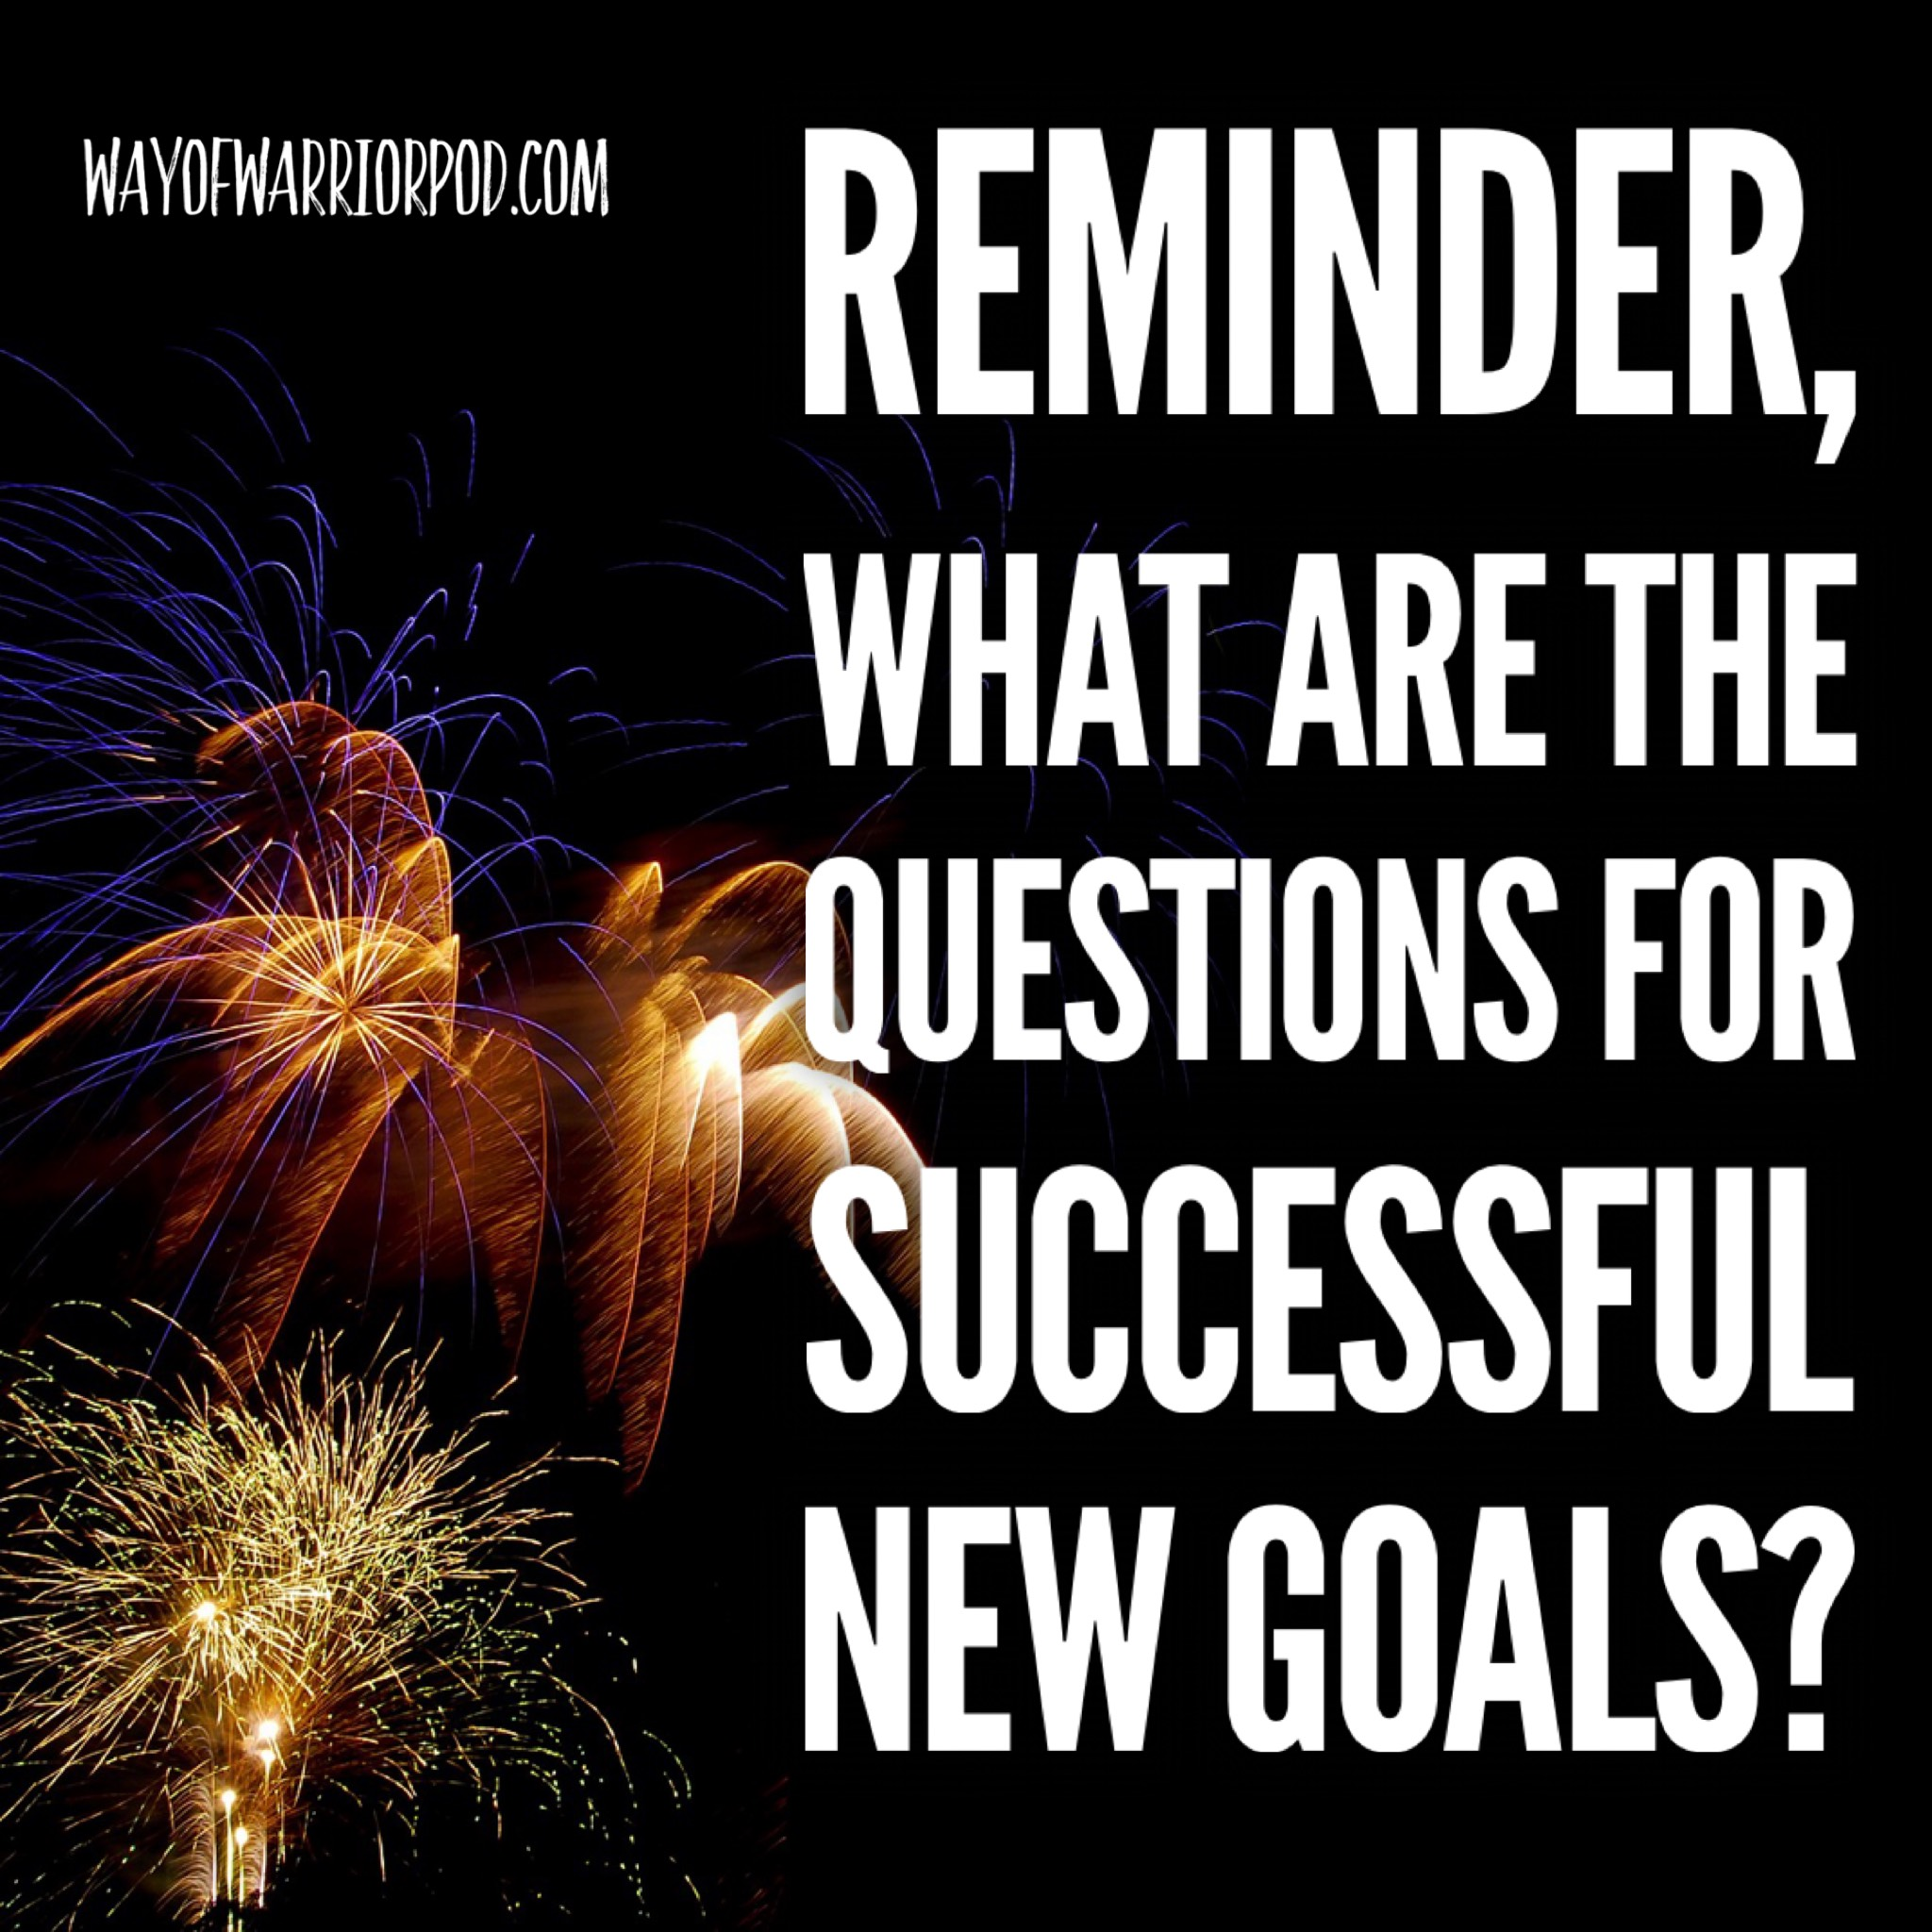 Reminder, What Are The Questions for Successful New Goals?